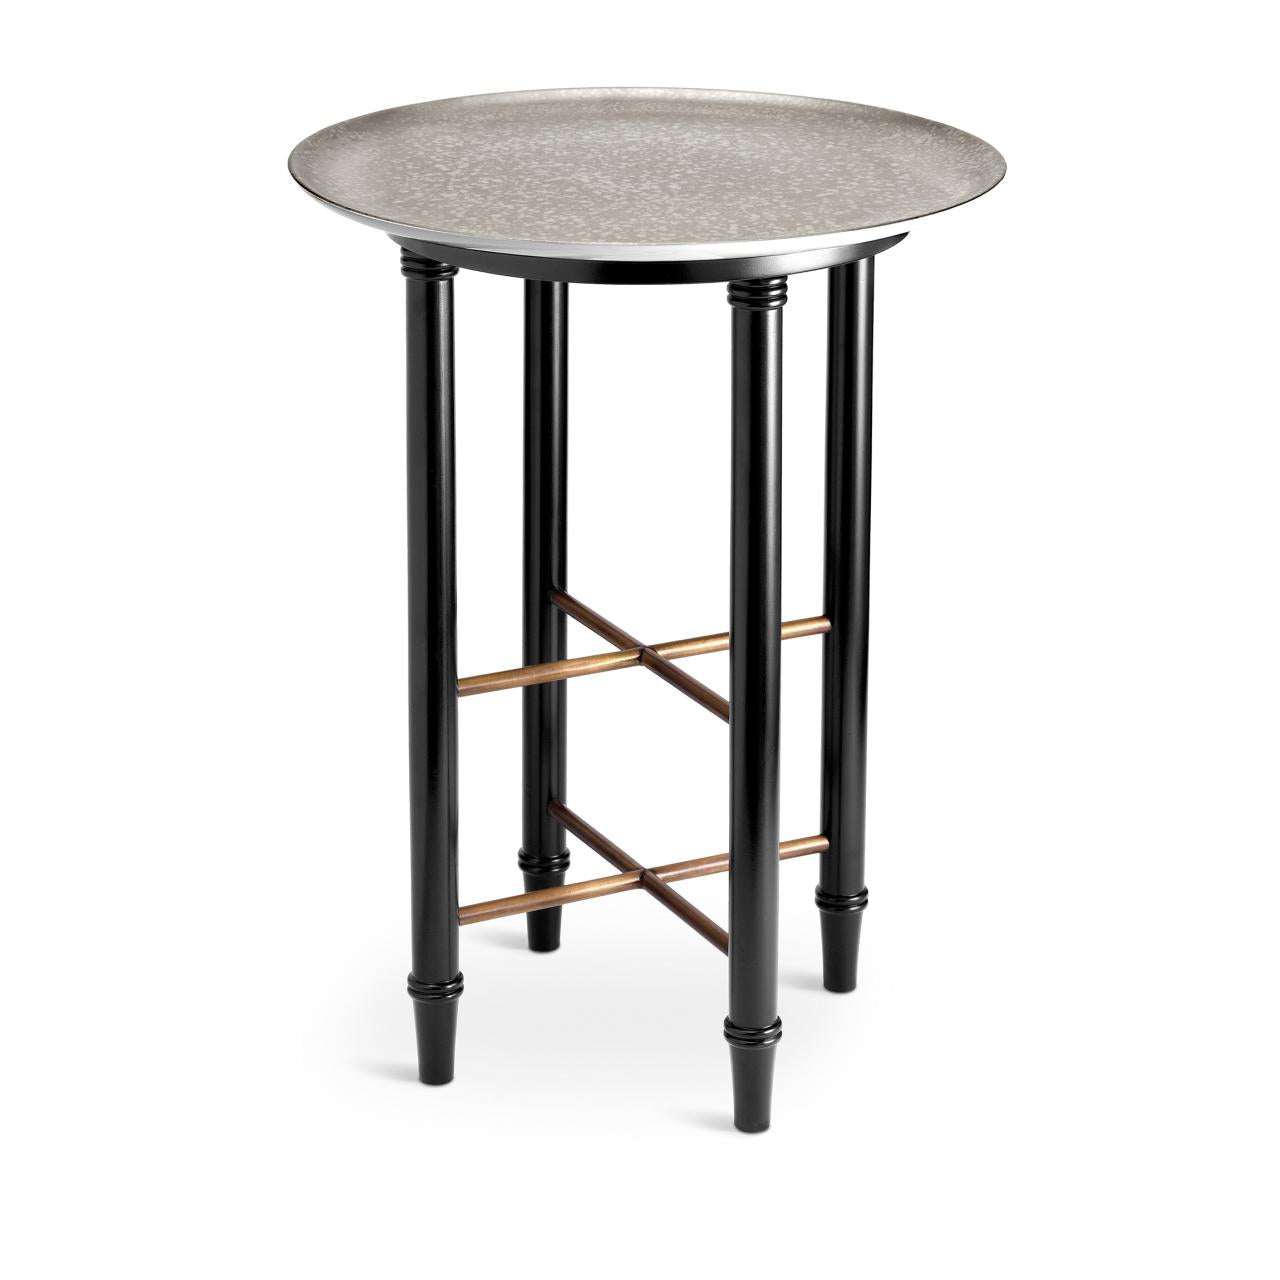 Alchimie Side Table - RSVP Style